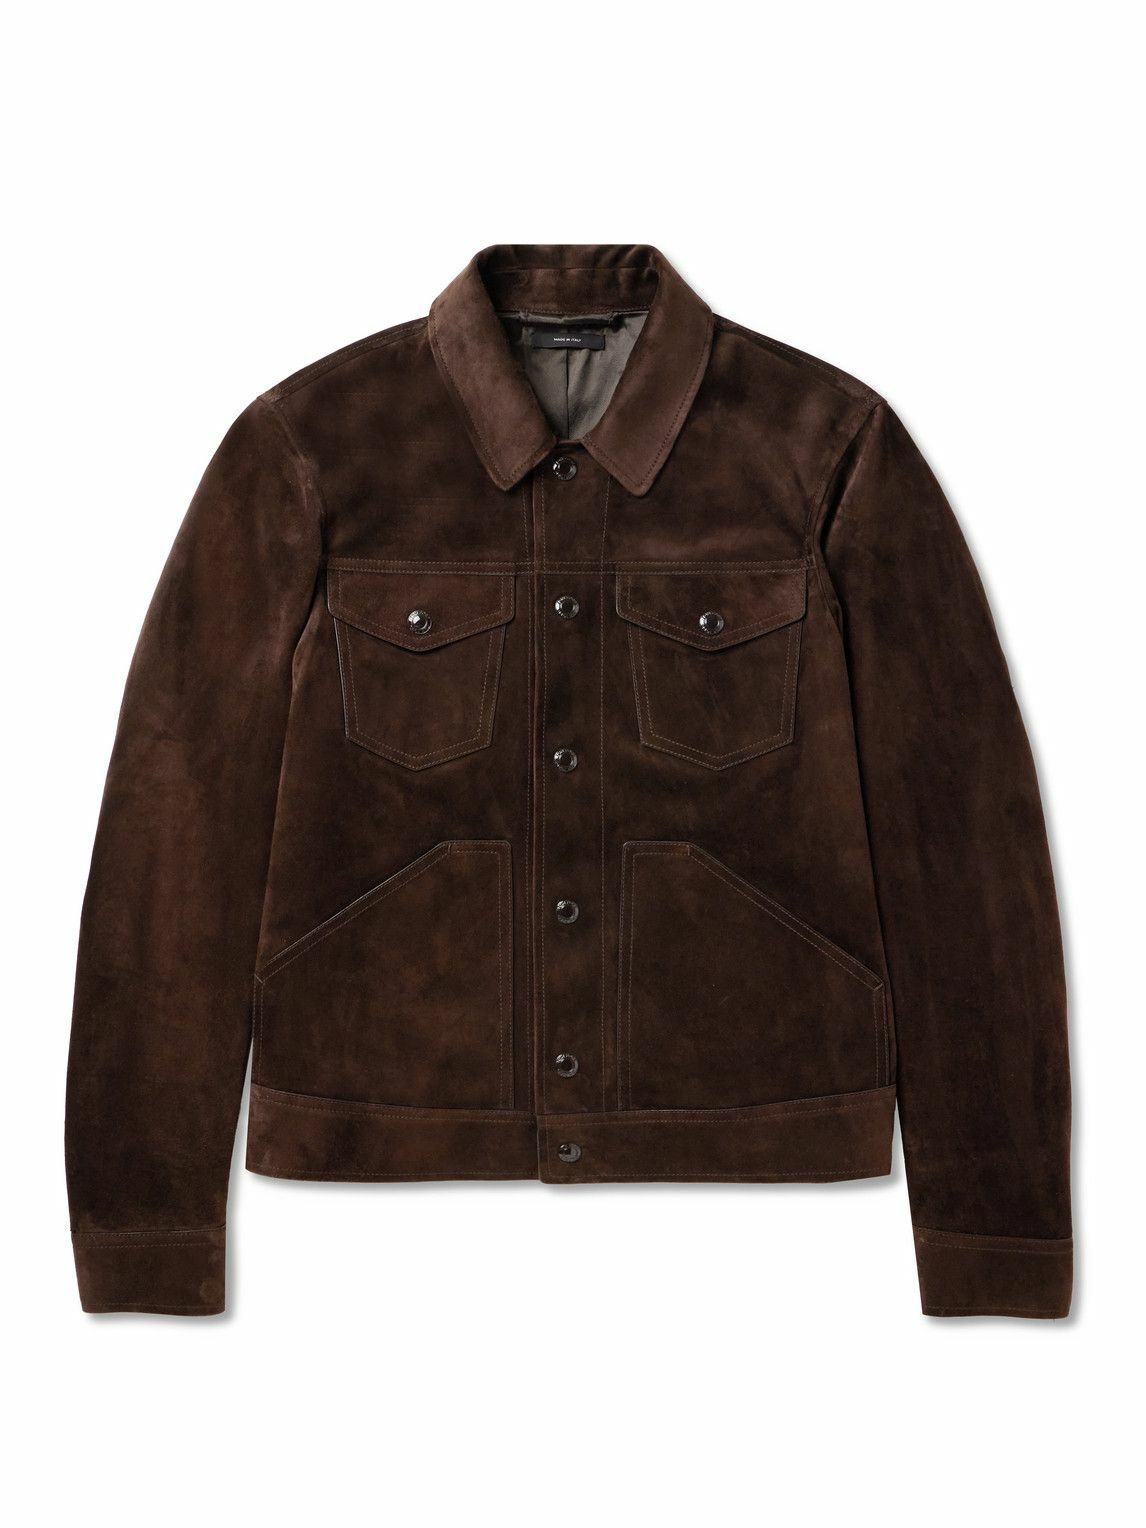 TOM FORD - Suede Trucker Jacket - Brown TOM FORD